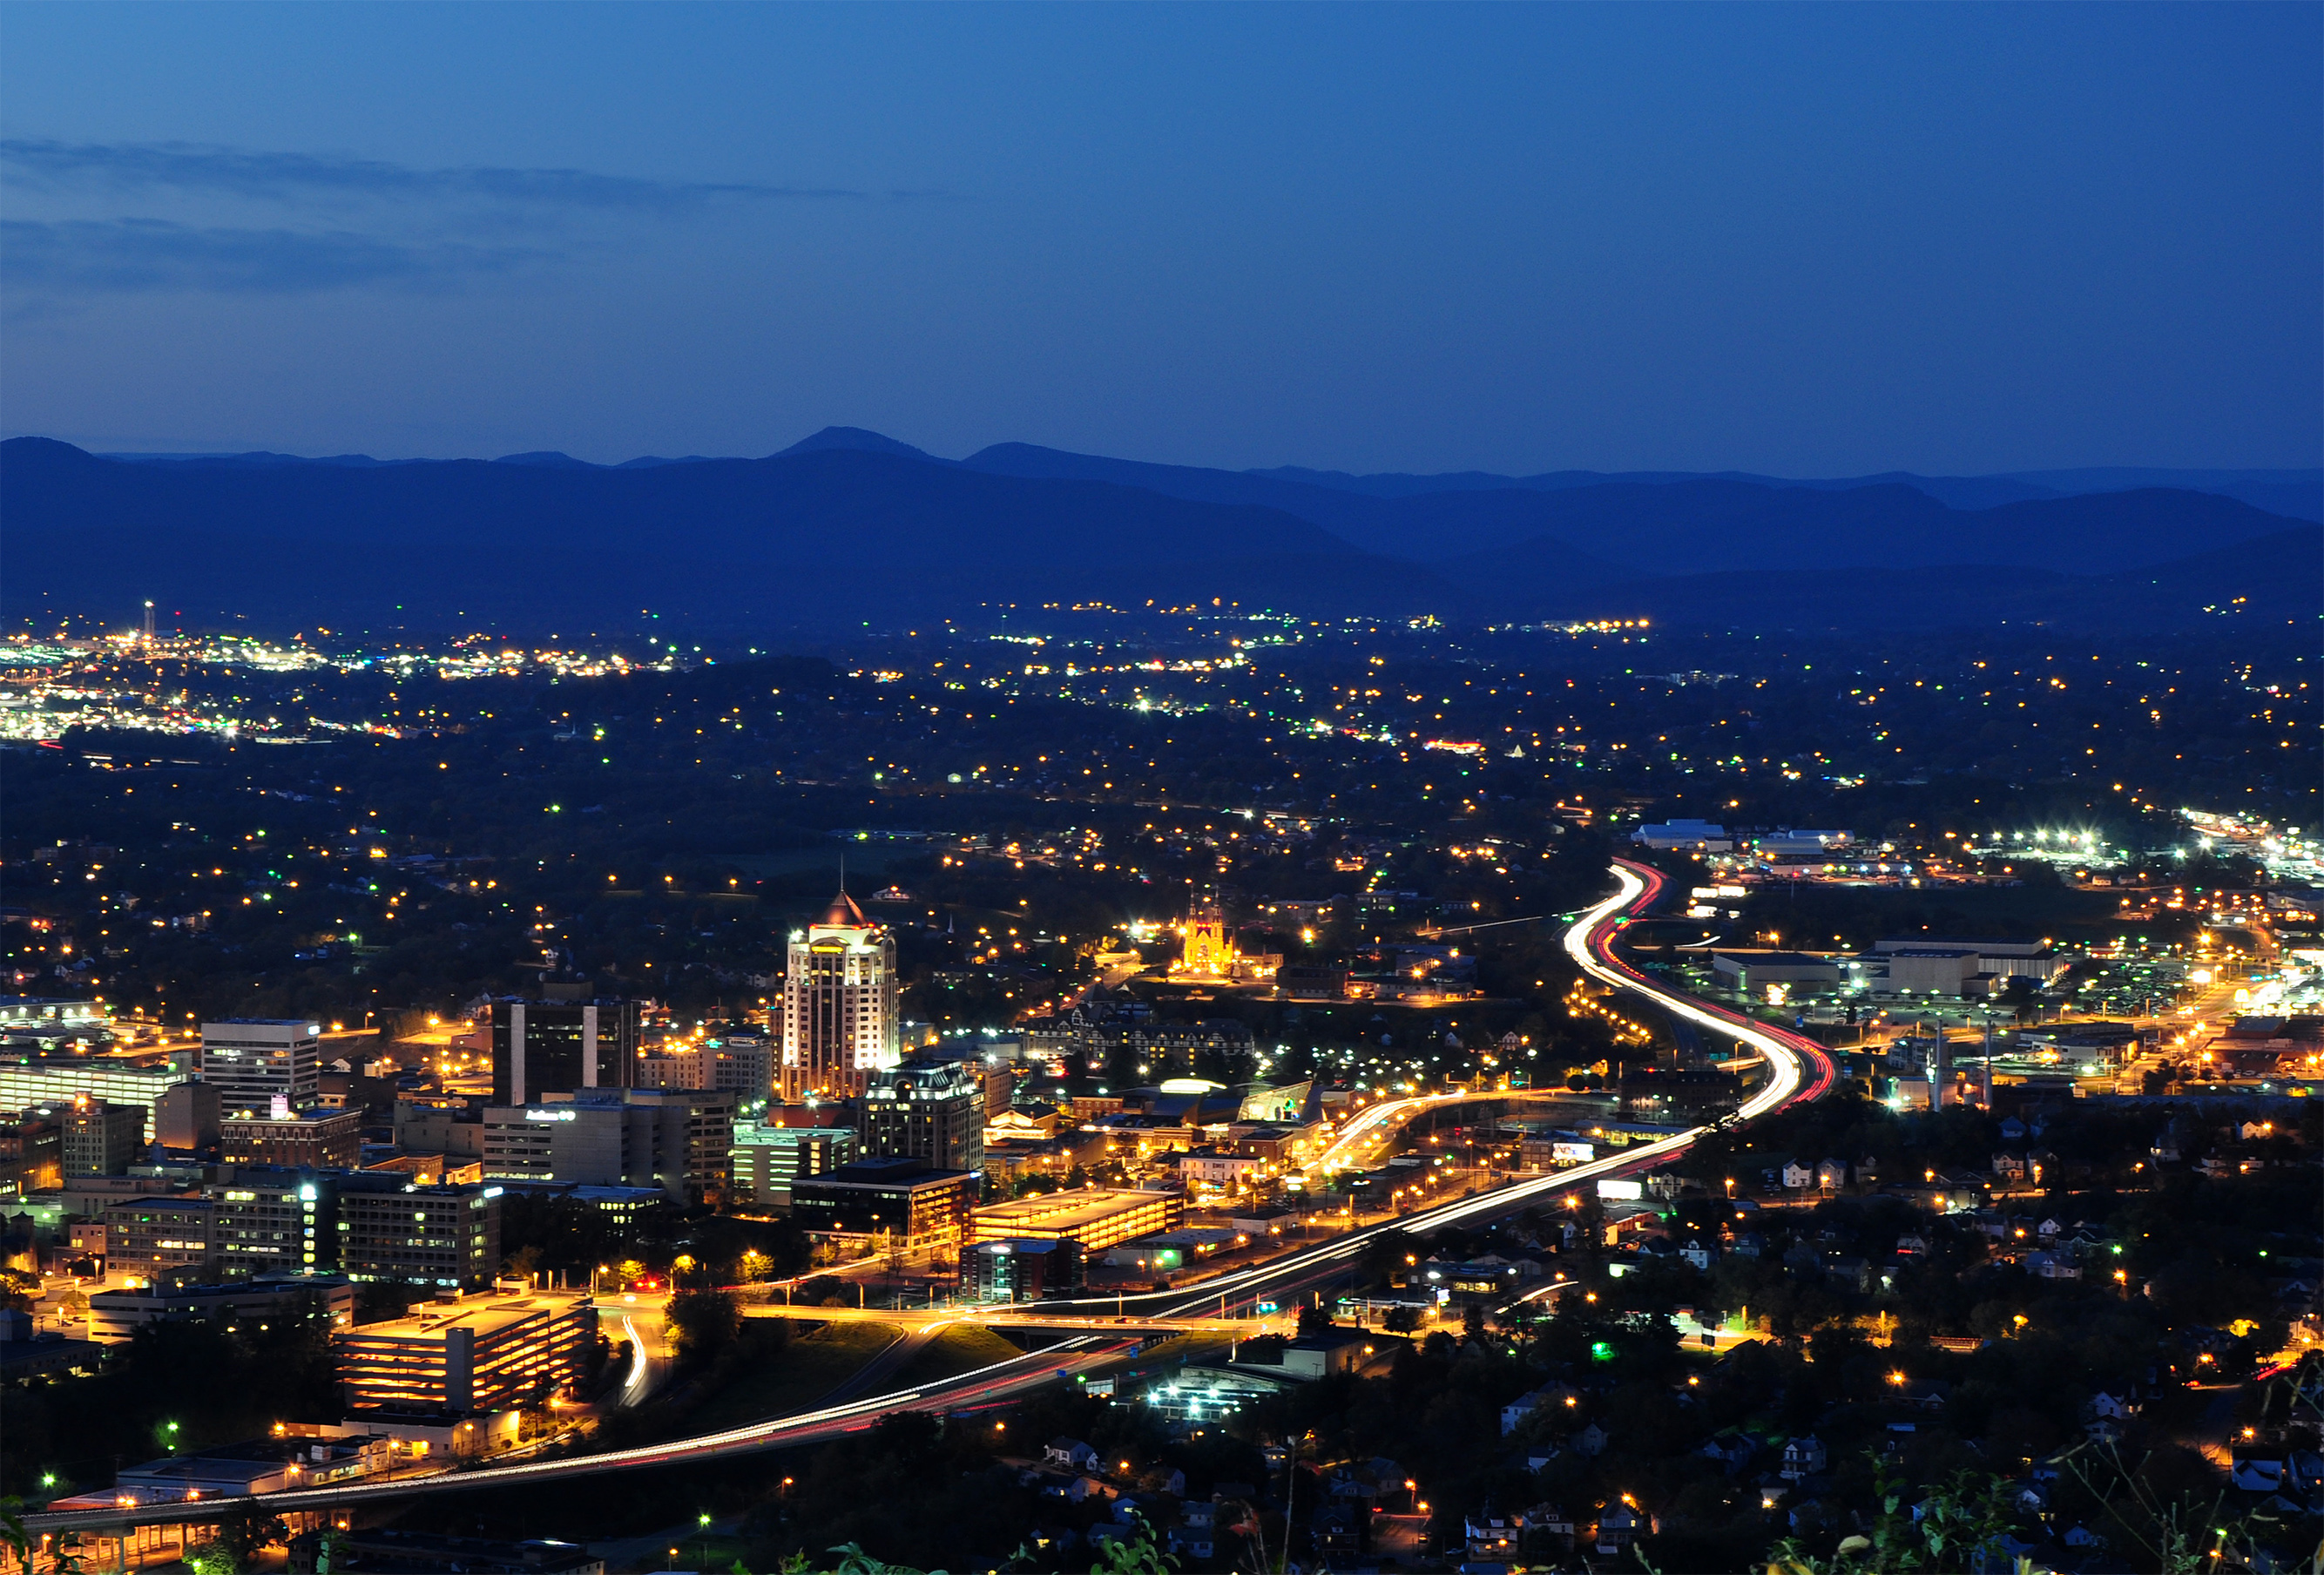 Roanoke ( ROH-ə-nohk) is an independent city in the U.S. state of Virginia. It is located in Southwest Virginia along the Roanoke River, in the Blue Ridge range of the greater Appalachian Mountains. Roanoke is approximately 50 miles (80 km) north of the Virginia–North Carolina border and 250 miles (400 km) southwest of Washington, D.C., along Interstate 81. At the 2020 census, Roanoke's population was 100,011, making it the largest city in Virginia west of the state capital Richmond. It is the primary population center of the Roanoke metropolitan area, which had a population of 315,251 in 2020.
The Roanoke Valley was originally home to members of the Siouan-speaking Tutelo tribe. However, in the 17th and early-to-mid 18th centuries, Scotch-Irish and later German American farmers gradually drove those Native Americans out of the area as the American frontier pressed westward. In 1882, the Norfolk and Western Railway (N&W) chose the small town of Big Lick as the site of its corporate headquarters and railroad shops. Within two years, the town had become the City of Roanoke. With a 2,300% population growth rate in the decade from 1880 to 1890, the young city experienced the advantages and disadvantages of its boomtown status. During the 20th century, Roanoke's boundaries expanded through multiple annexations from the surrounding Roanoke County, and it became Southwest Virginia's economic and cultural hub. The 1982 decision by N&W to relocate their headquarters out of the city, combined with other manufacturing closures, led Roanoke to pivot to a primarily service economy. In the 21st century, a robust healthcare industry and the development and increased marketing of its outdoor amenities have helped reverse prior declining population trends.
Roanoke is known for the Roanoke Star, an 88.5-foot-tall (27.0 m) illuminated star that sits atop a mountain within the city's limits and is the origin of its nickname, "The Star City of the South". Other points of interest include the Hotel Roanoke, a 330-room Tudor Revival structure built by N&W in 1882, the Taubman Museum of Art, designed by architect Randall Stout, and the city's farmer's market, the oldest continuously operating open-air market in the state. The Roanoke Valley features 26 miles of greenways with bicycle and pedestrian trails, and the city's location in the Blue Ridge Mountains provides access to numerous outdoor recreation opportunities.